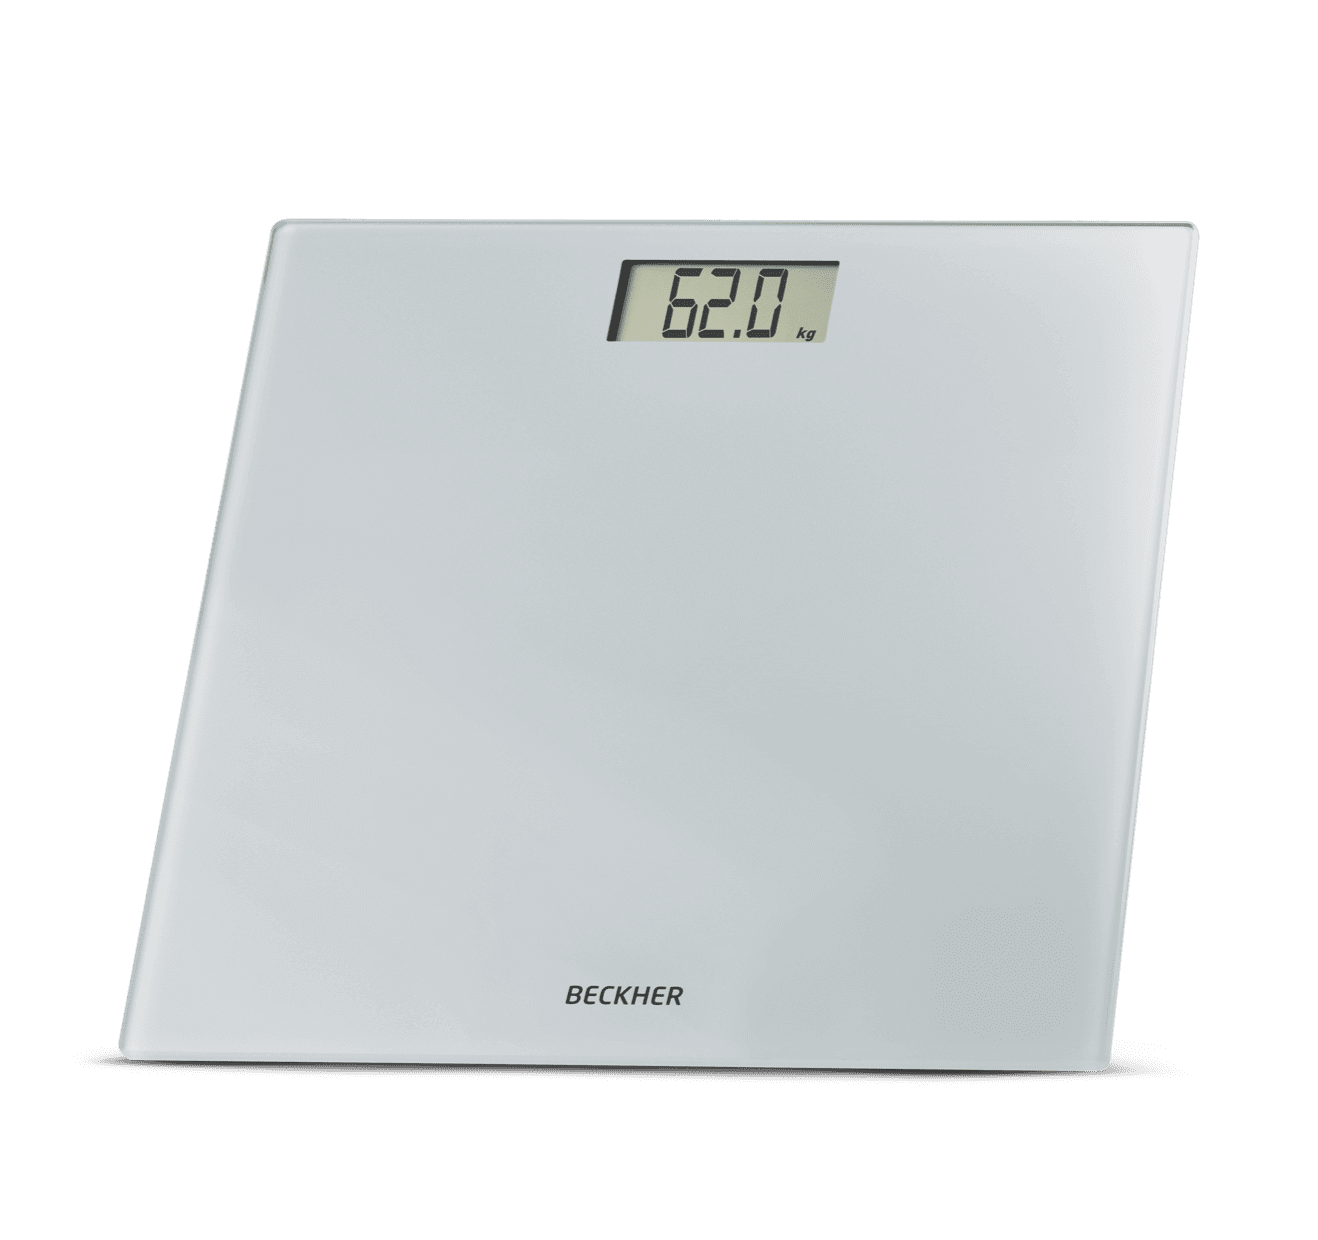 Digital Body Scale by Beckher, product number MI-BS 1701B